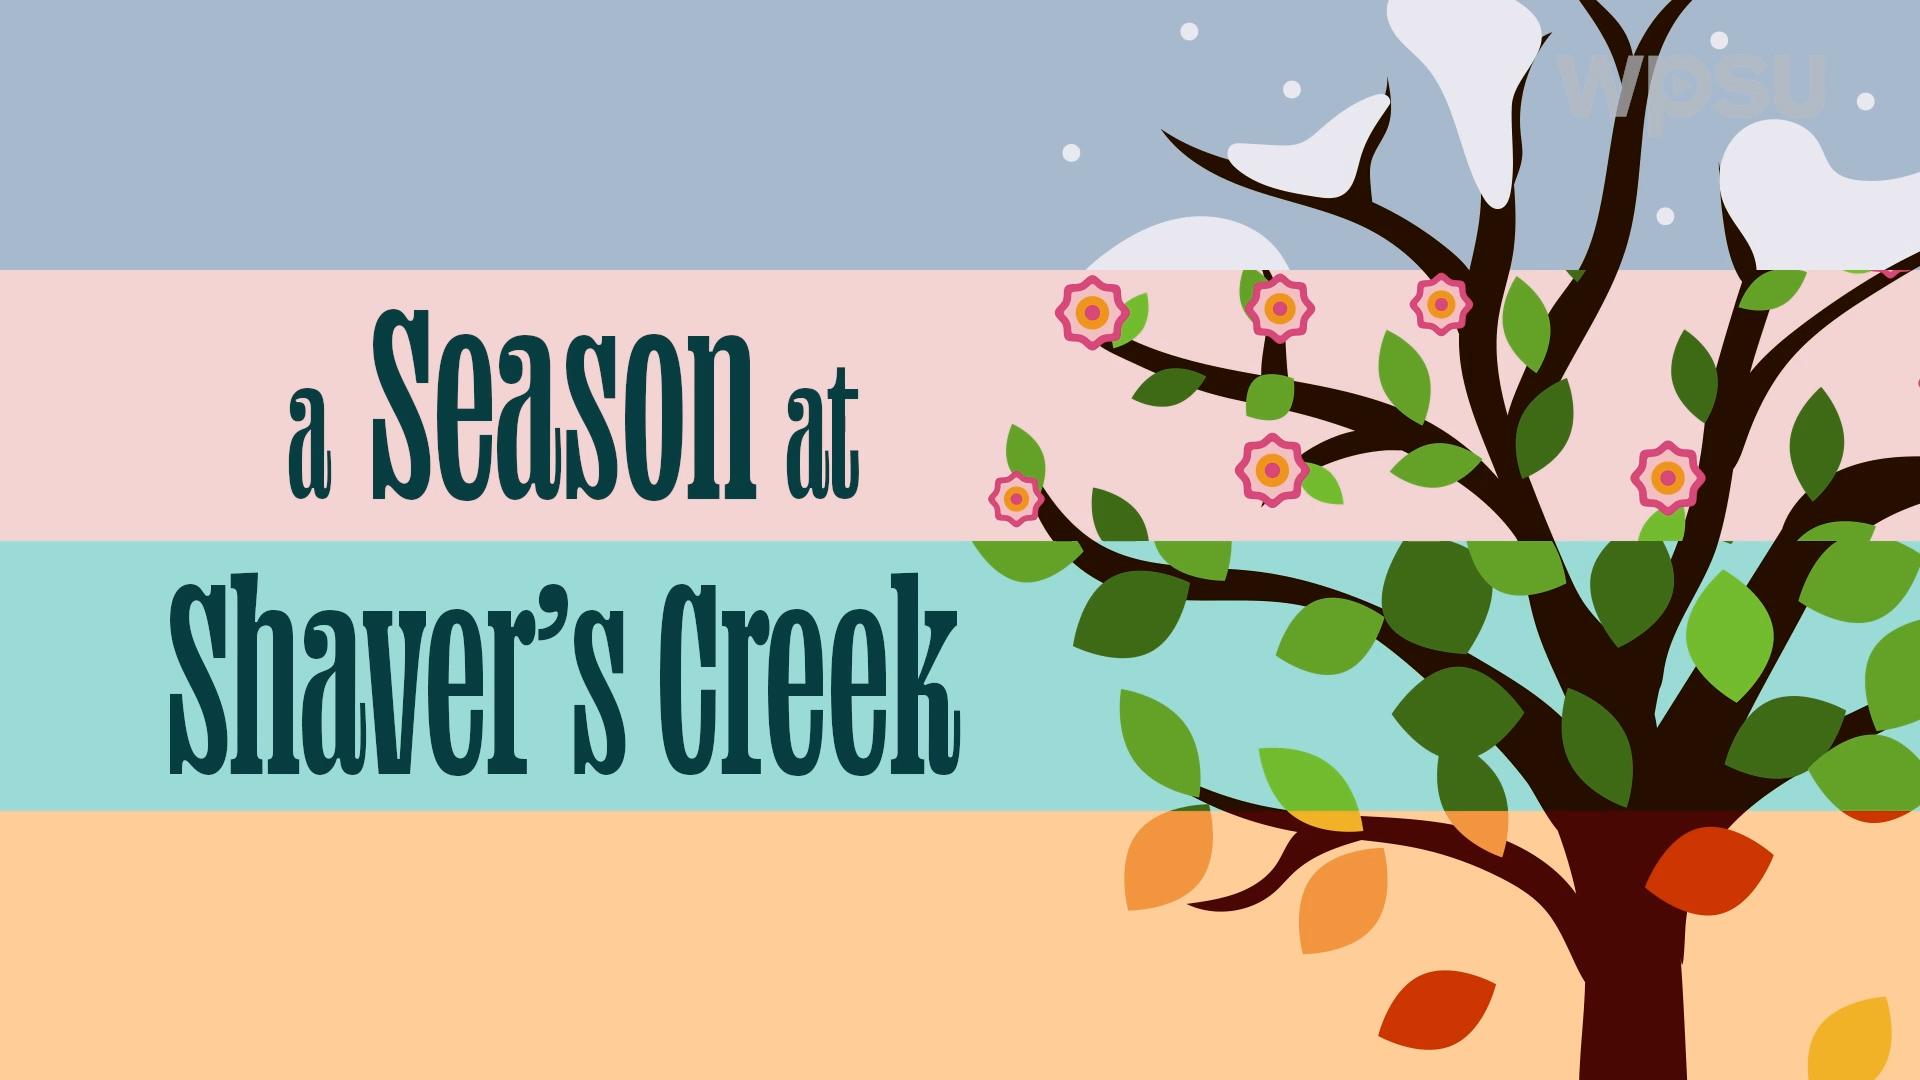 A cartoon tree on a multi-colored background with "A Season at Shaver's Creek" in large text in the foreground.